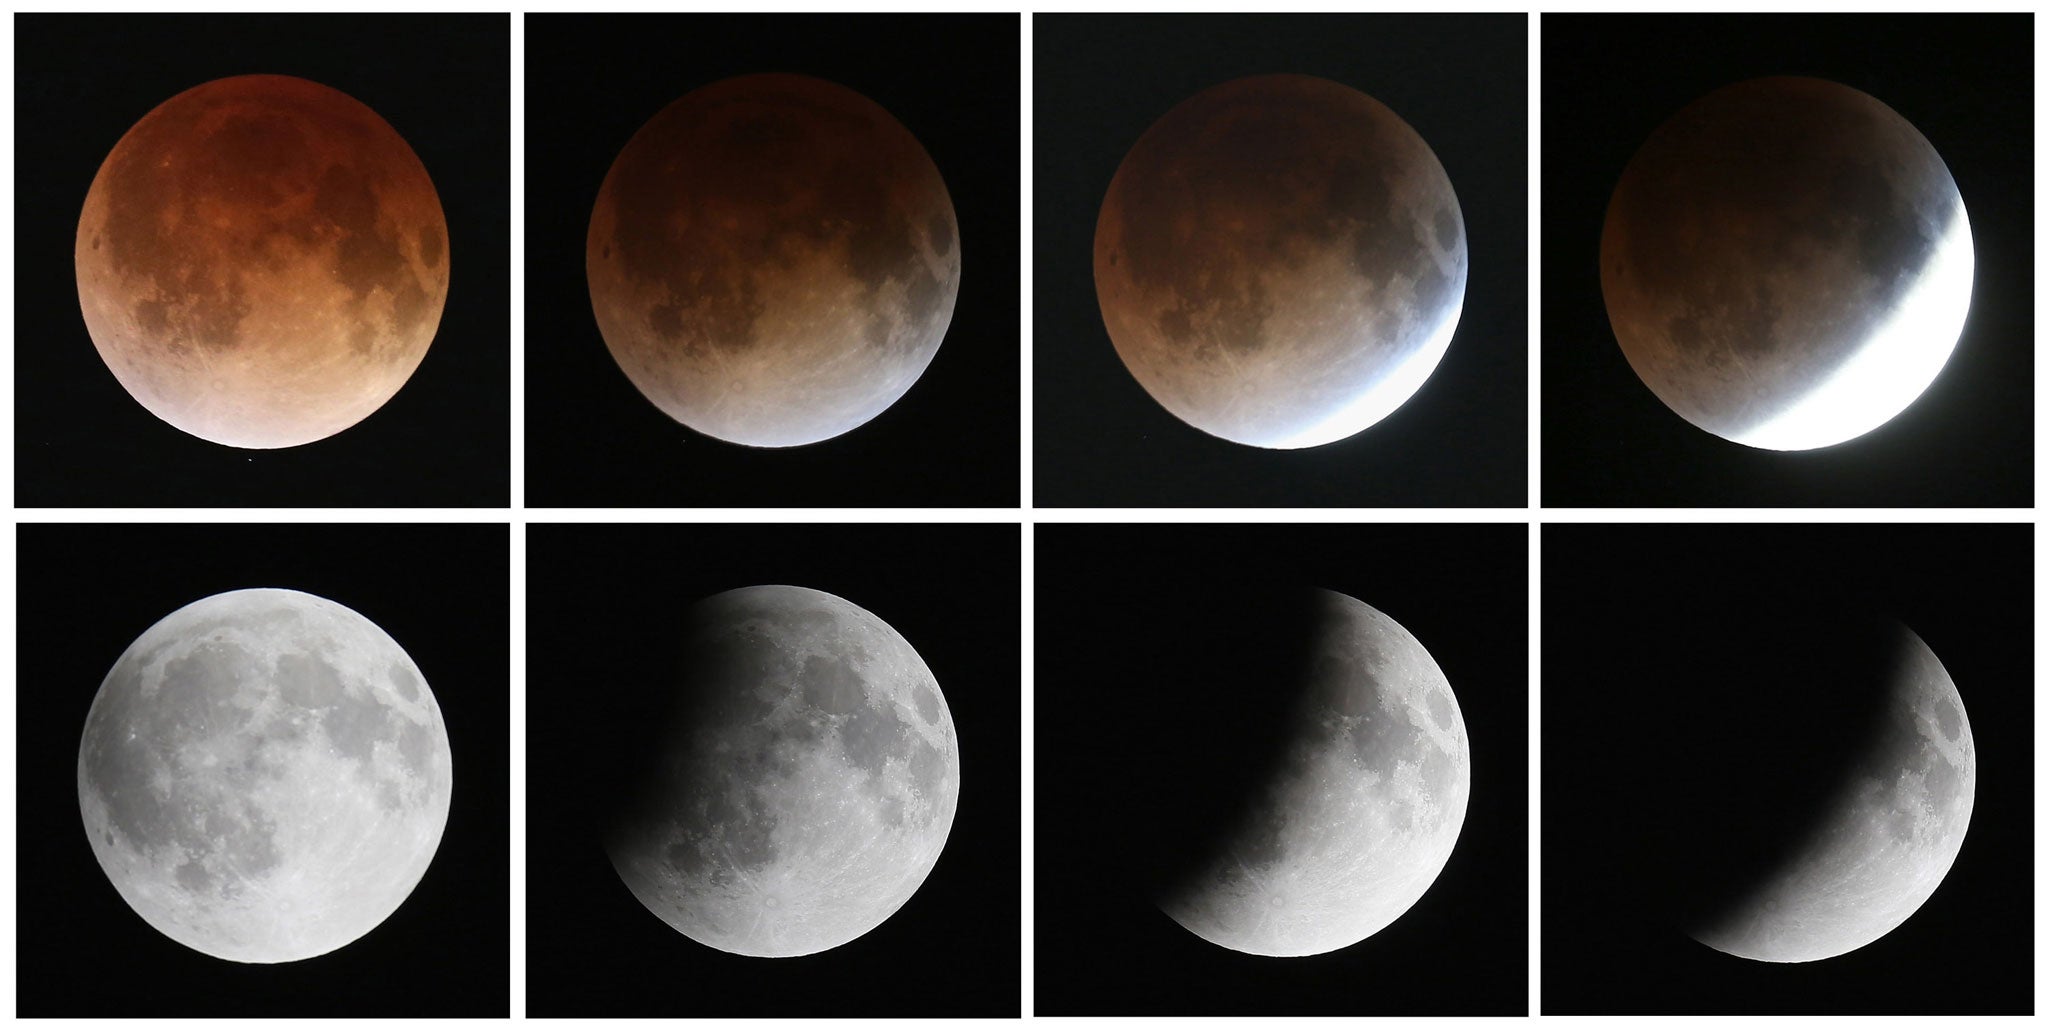 A sequence, from bottom left to top left, of the moon's transition during a total lunar eclipse in Miami, Florida